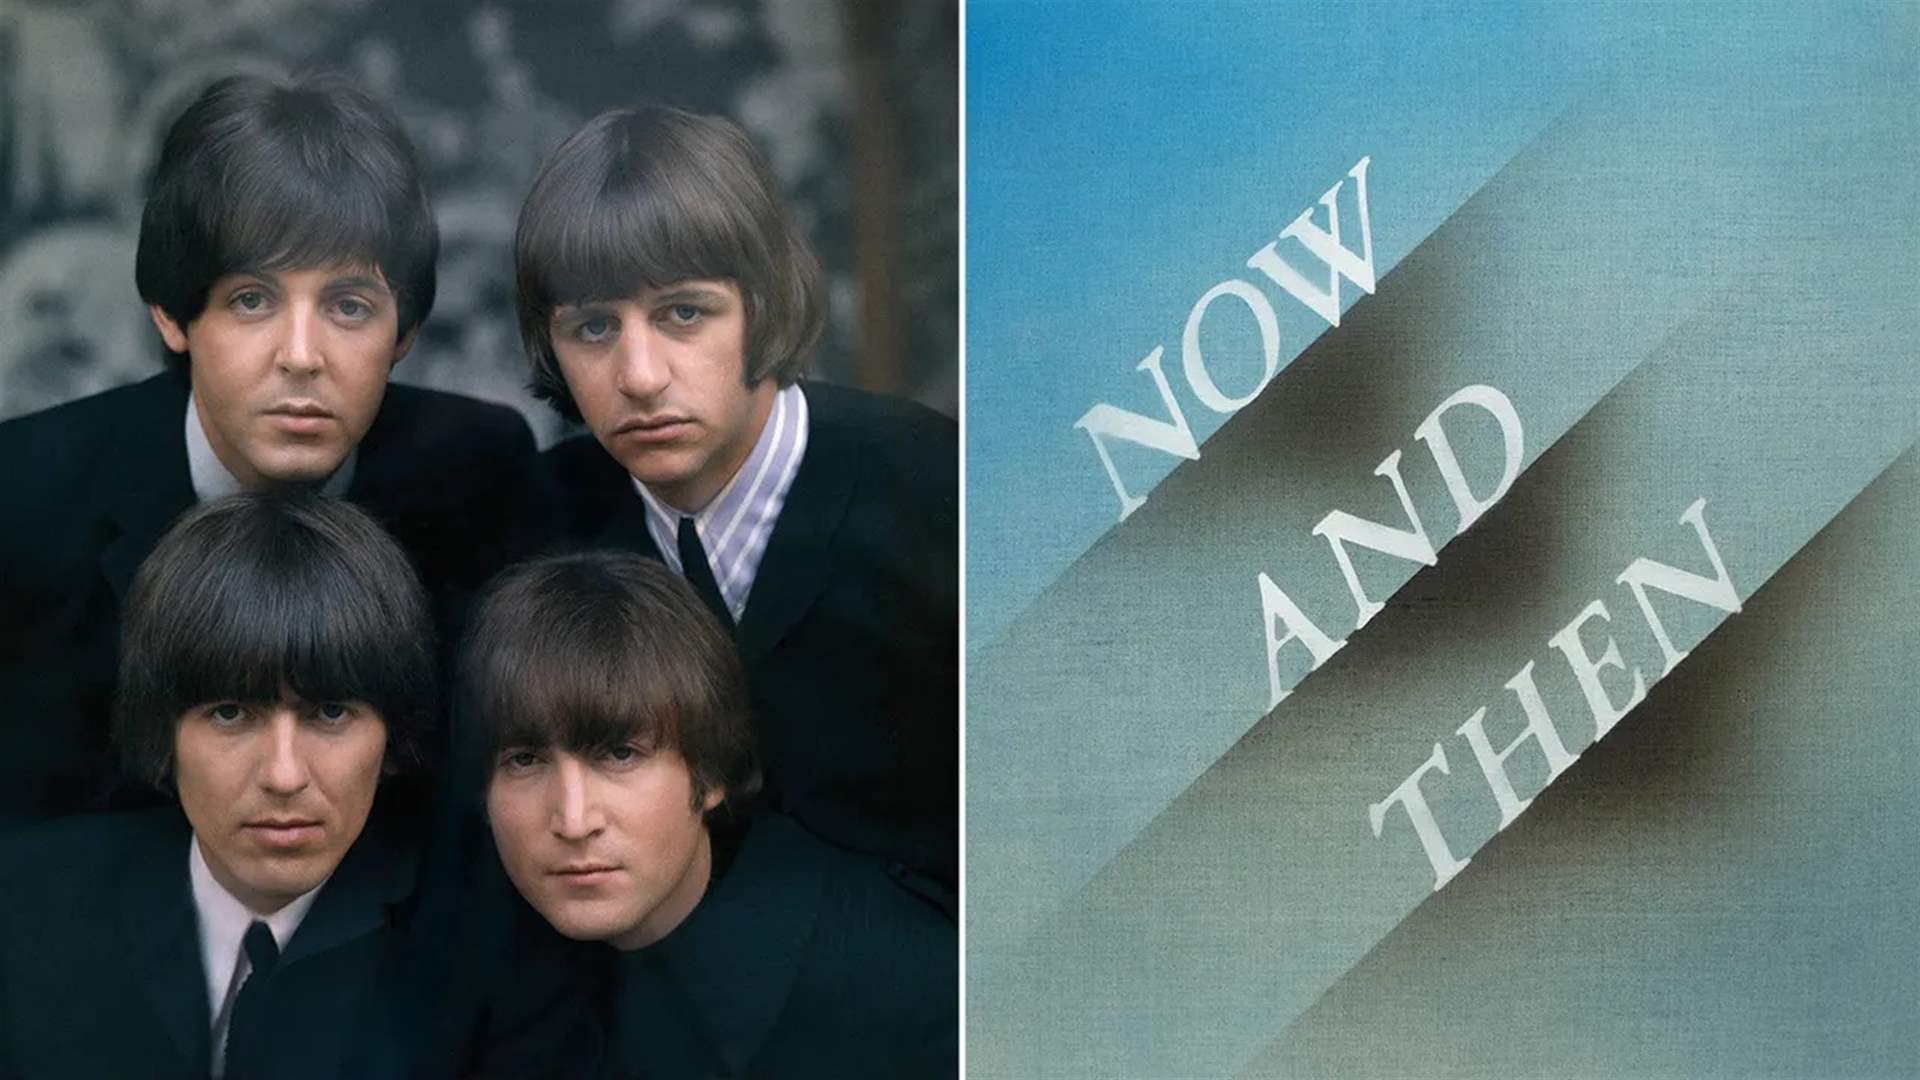 The last Beatles song: &quot;Now and Then&quot; to finally release on November 2nd